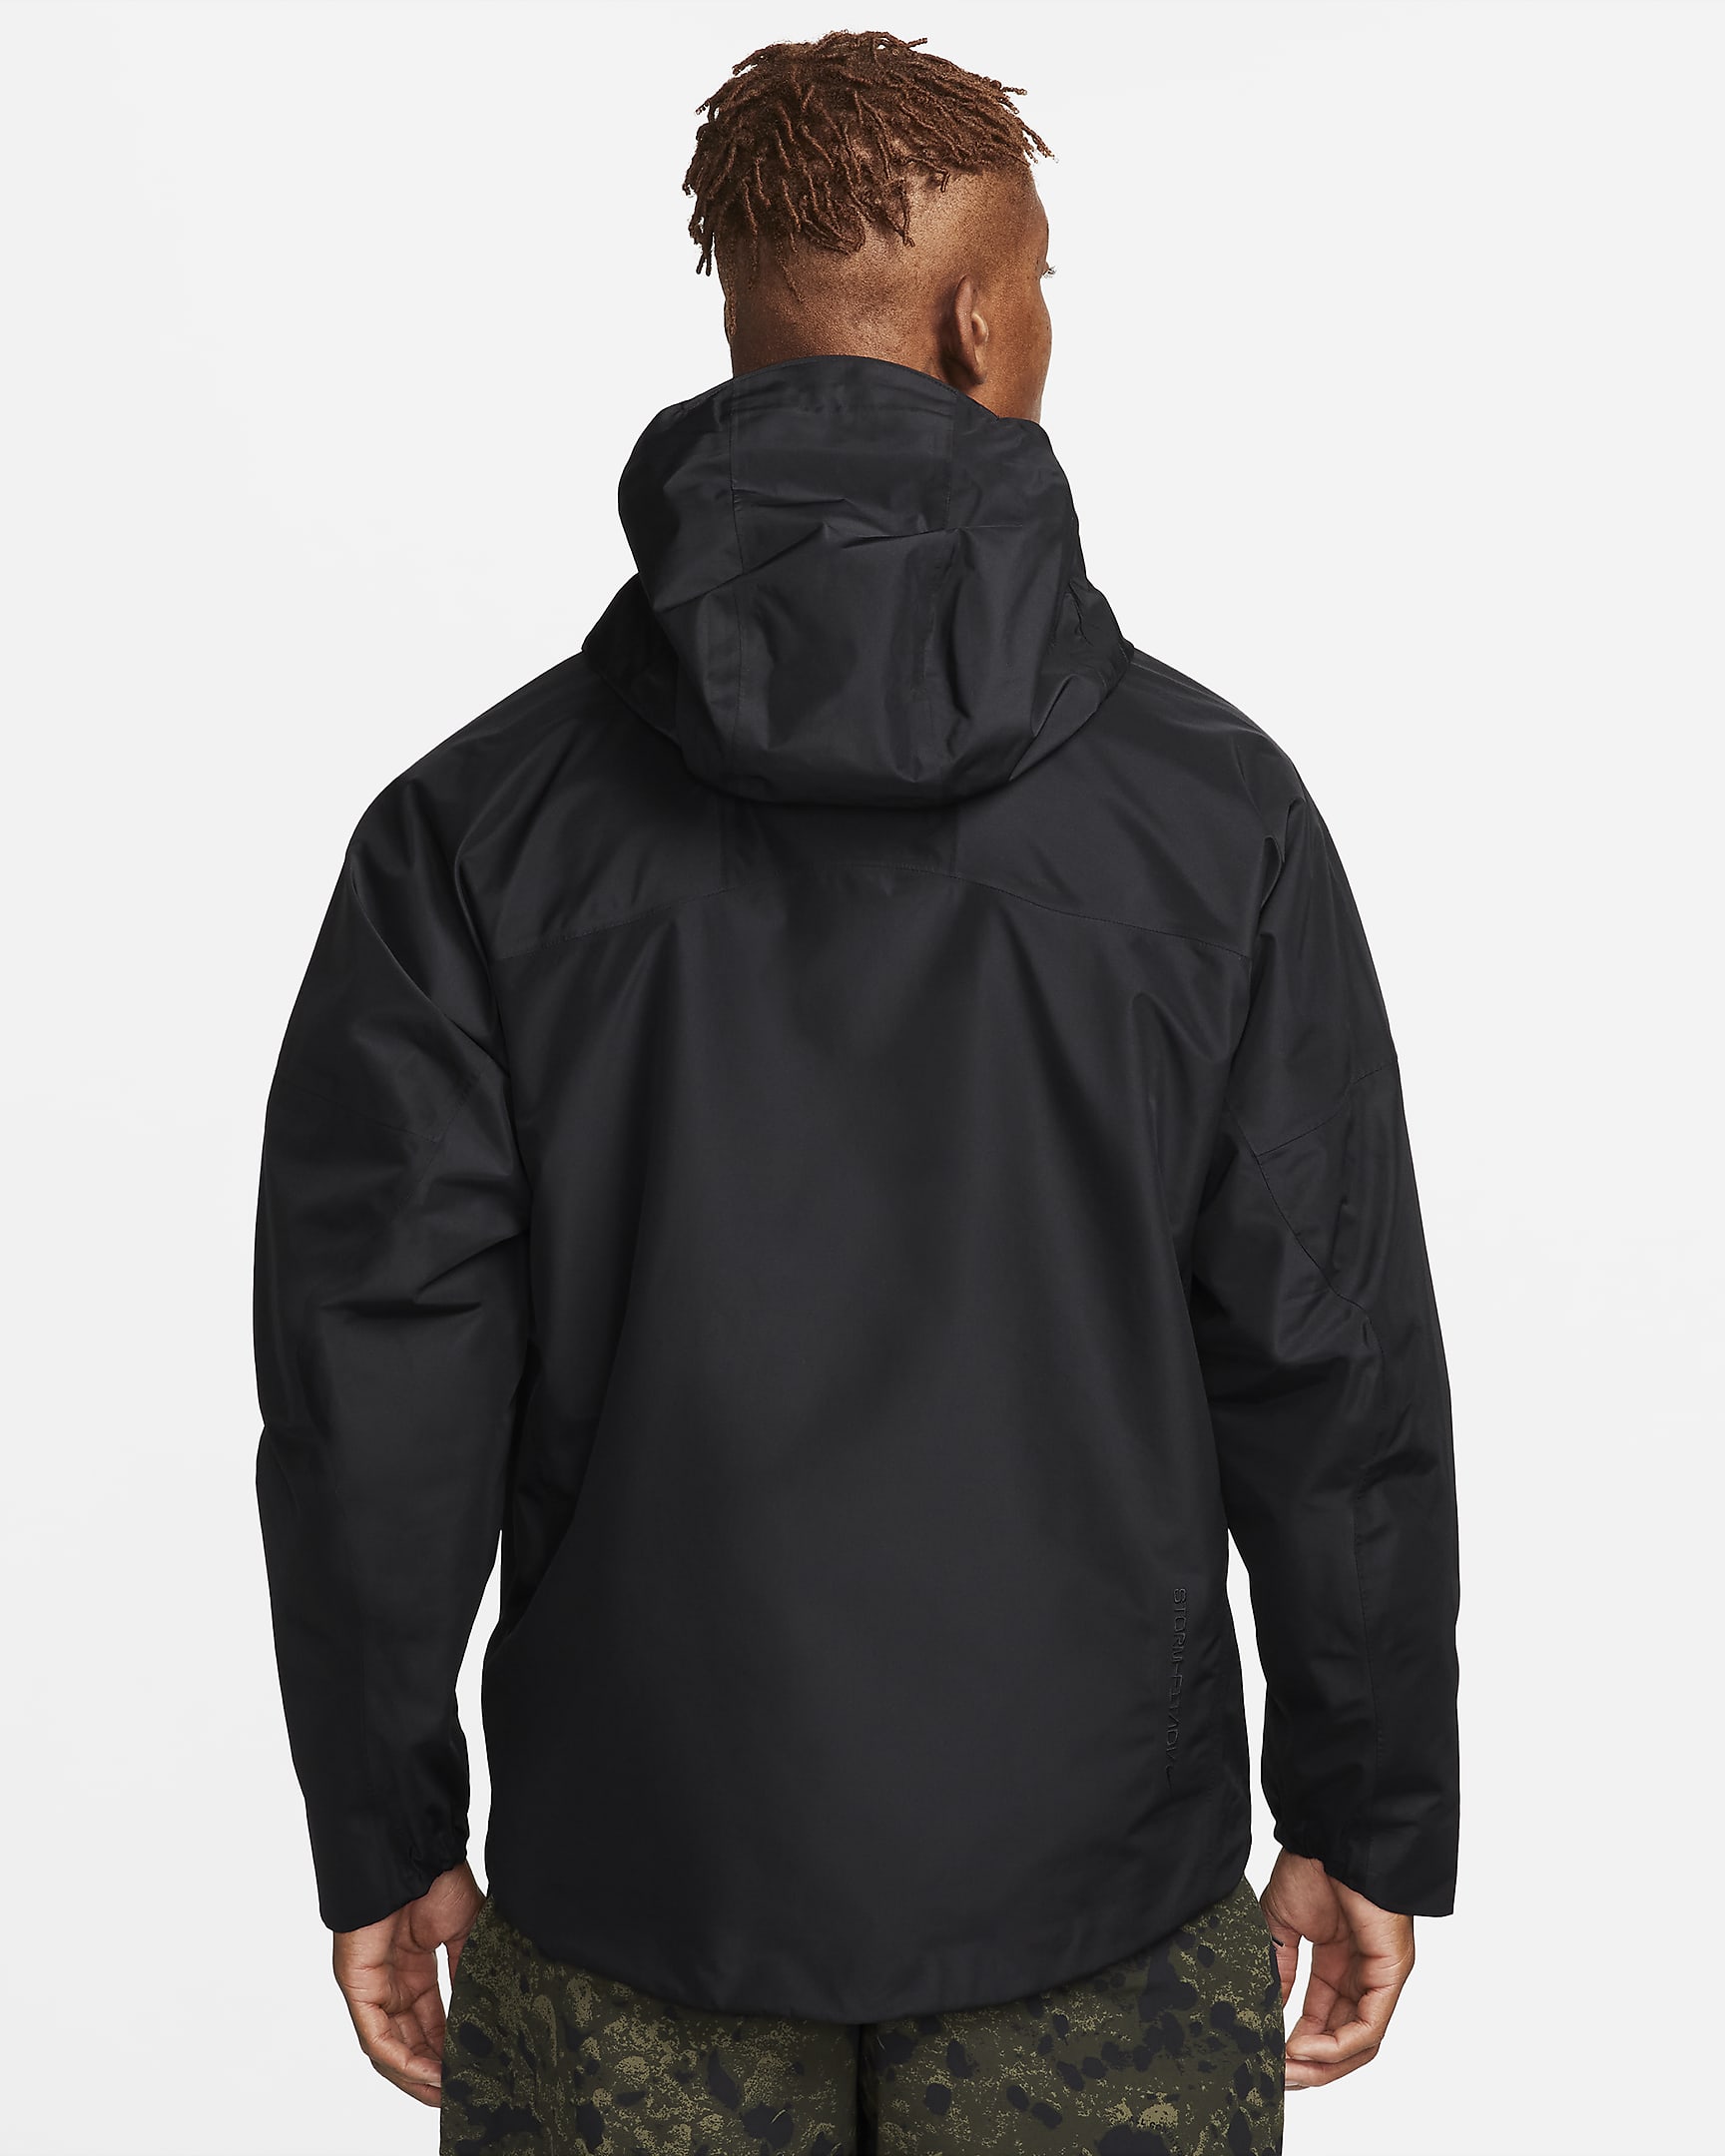 Nike Storm-FIT ADV ACG 'Chain of Craters' Men's Jacket. Nike IL